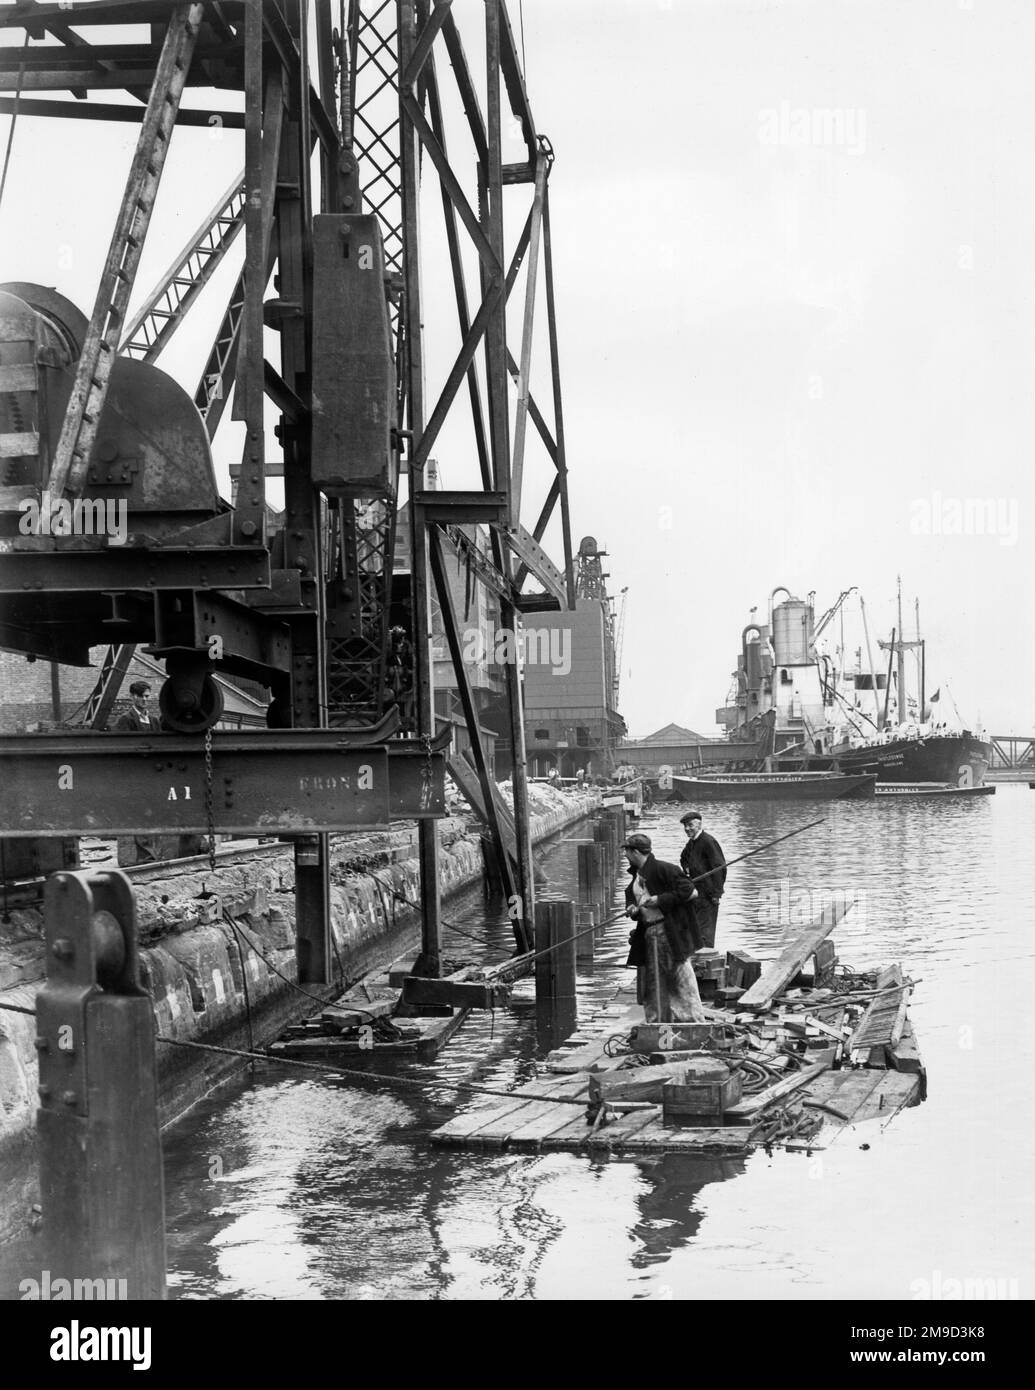 Dockside scene with men on a raft and vessels in the background, River Thames, Port of London. Stock Photo